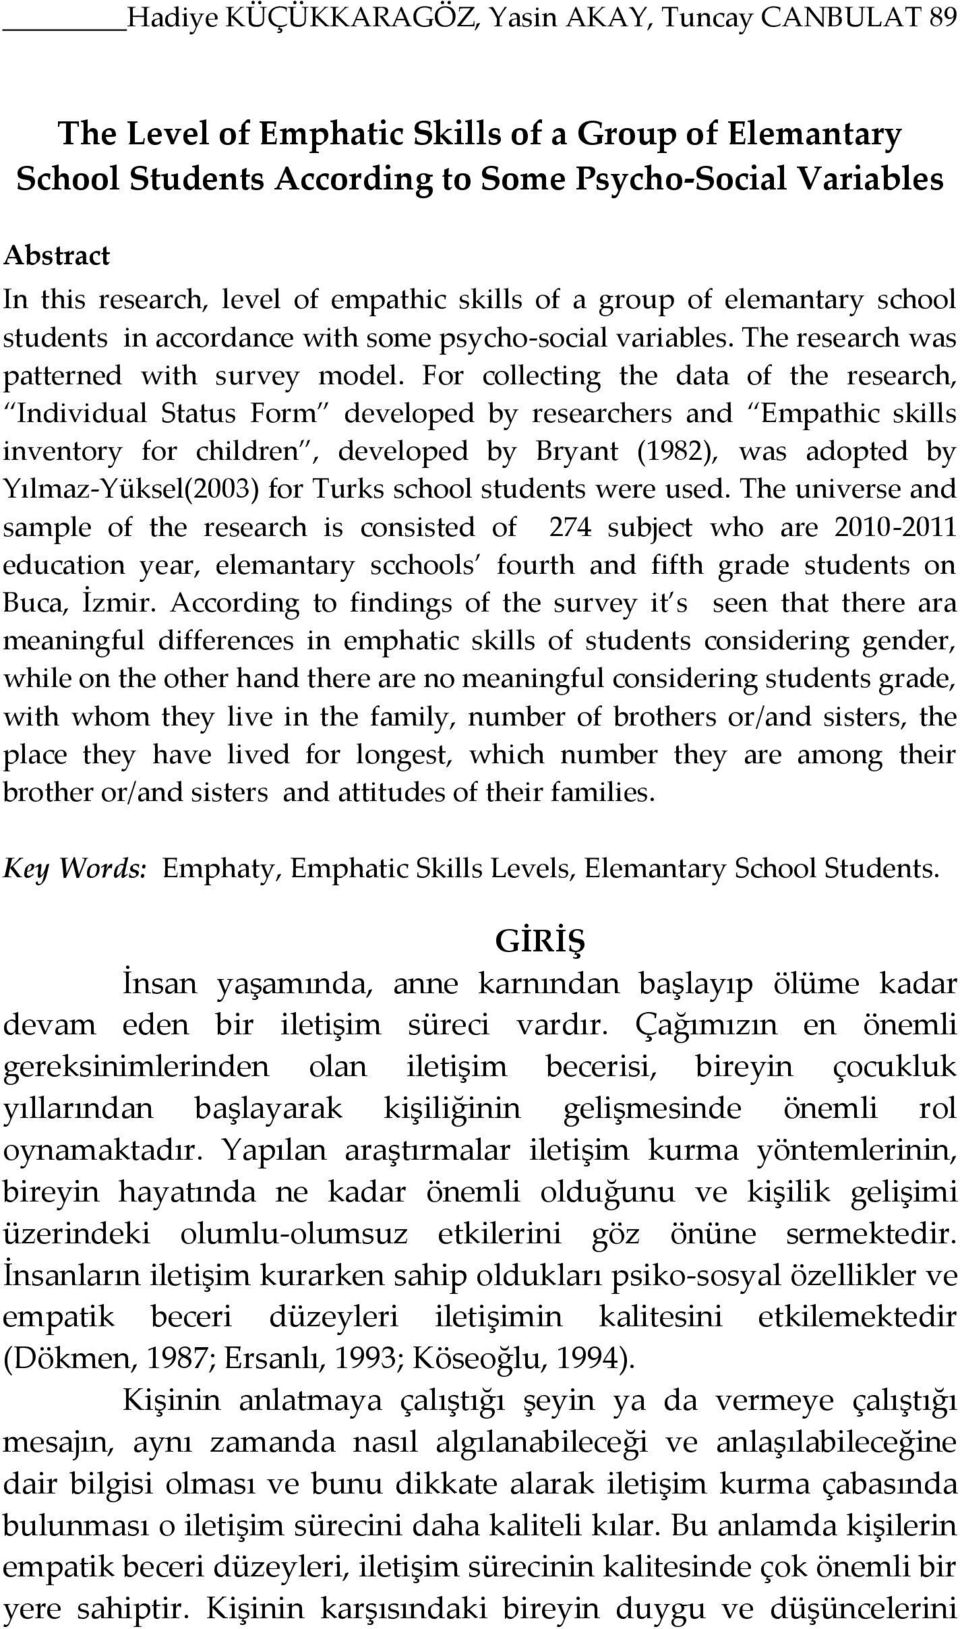 For collecting the data of the research, Individual Status Form developed by researchers and Empathic skills inventory for children, developed by Bryant (1982), was adopted by Yılmaz-Yüksel(2003) for